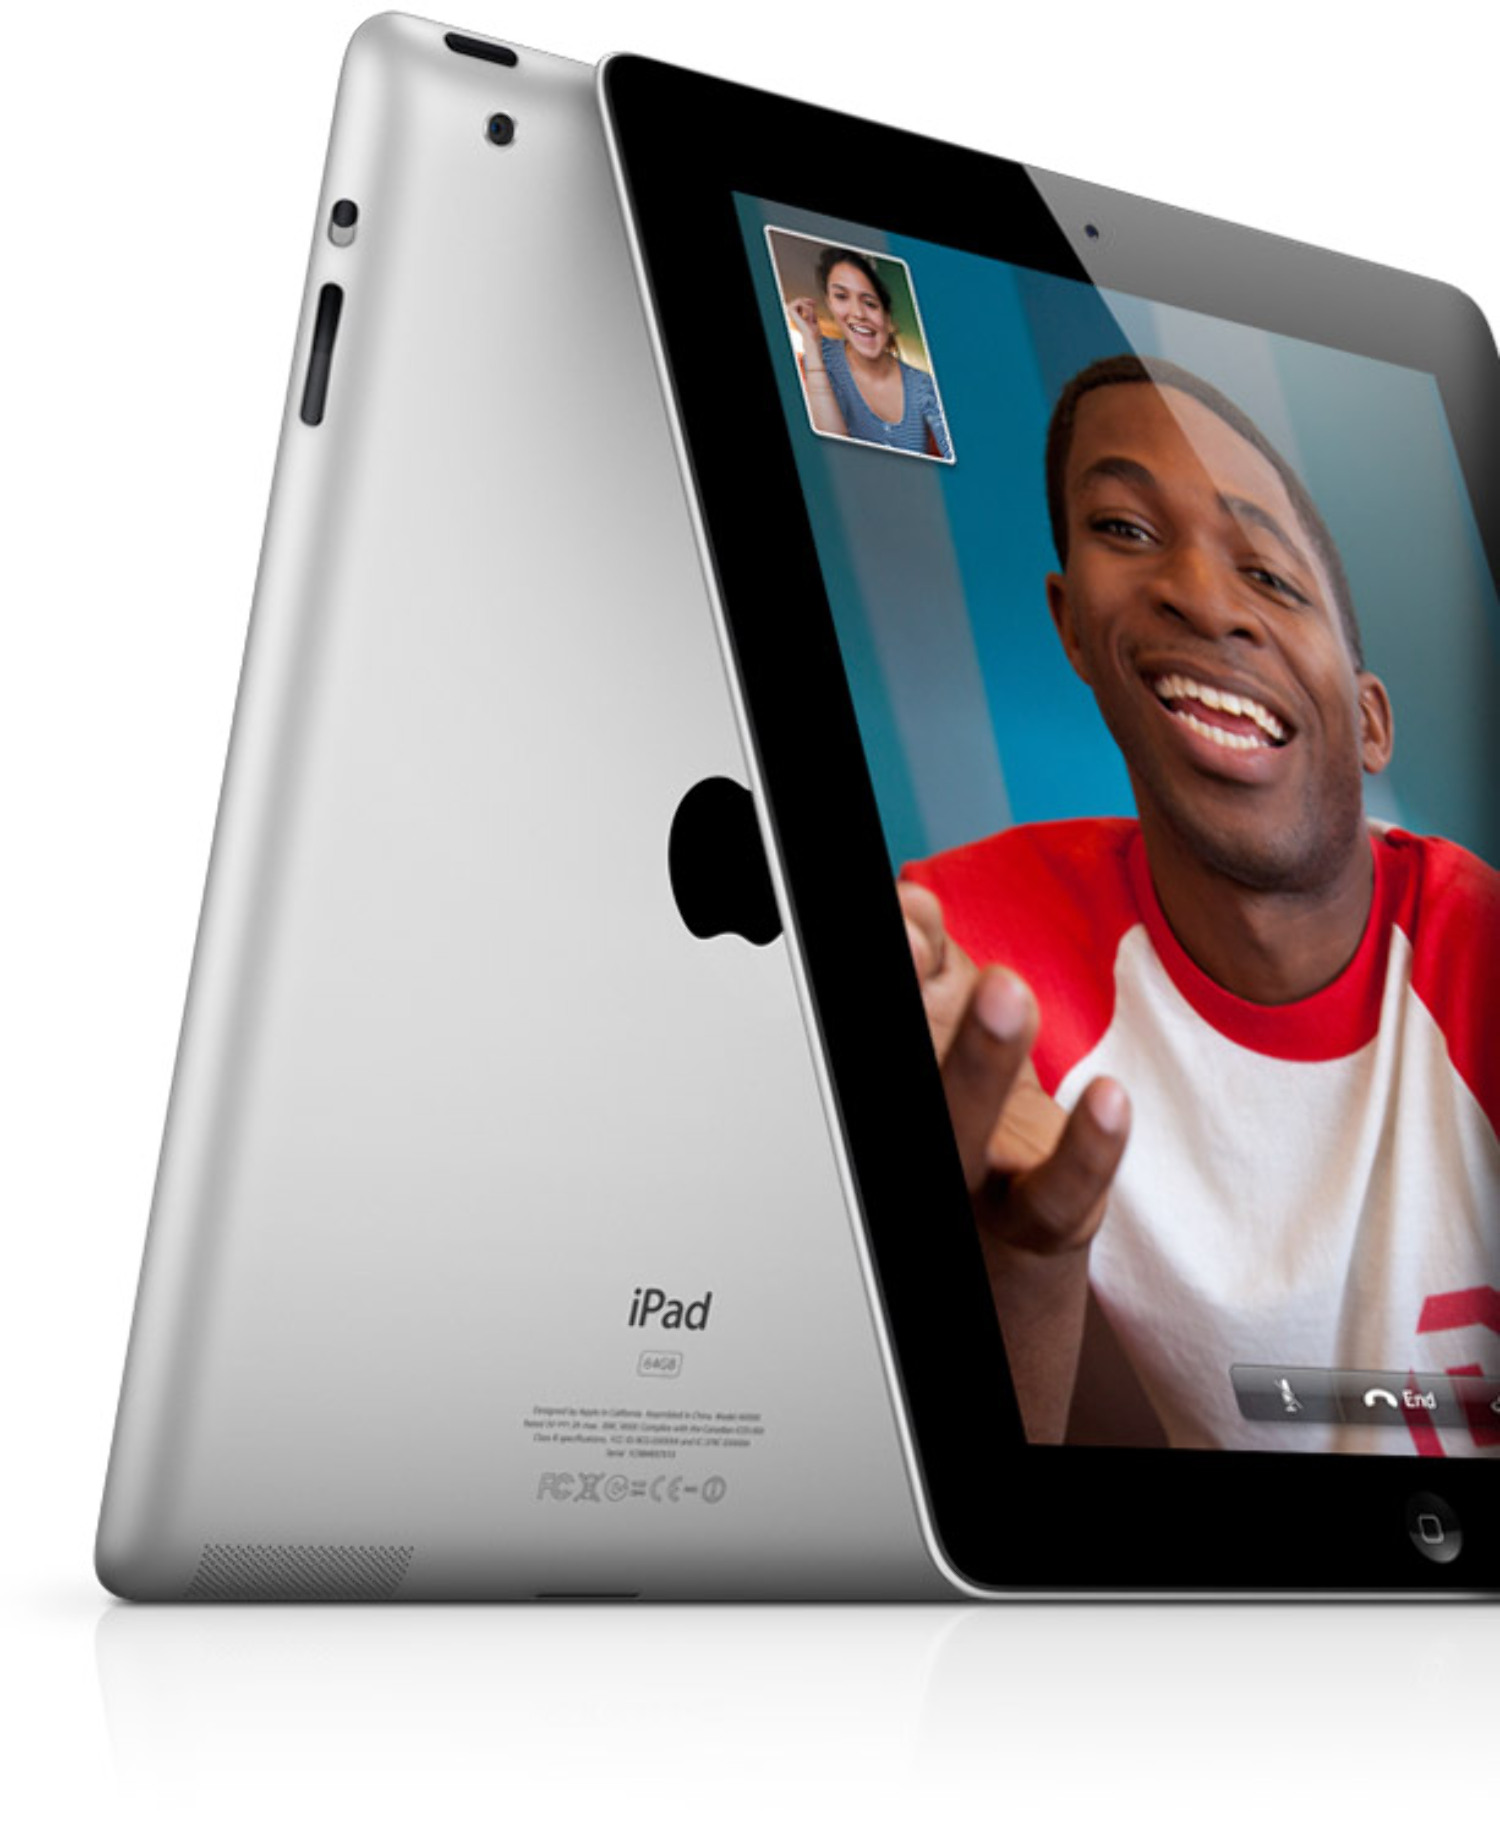 REVIEW: Apple iPad 2 - Does iPad 2 reset the bar for tablets?